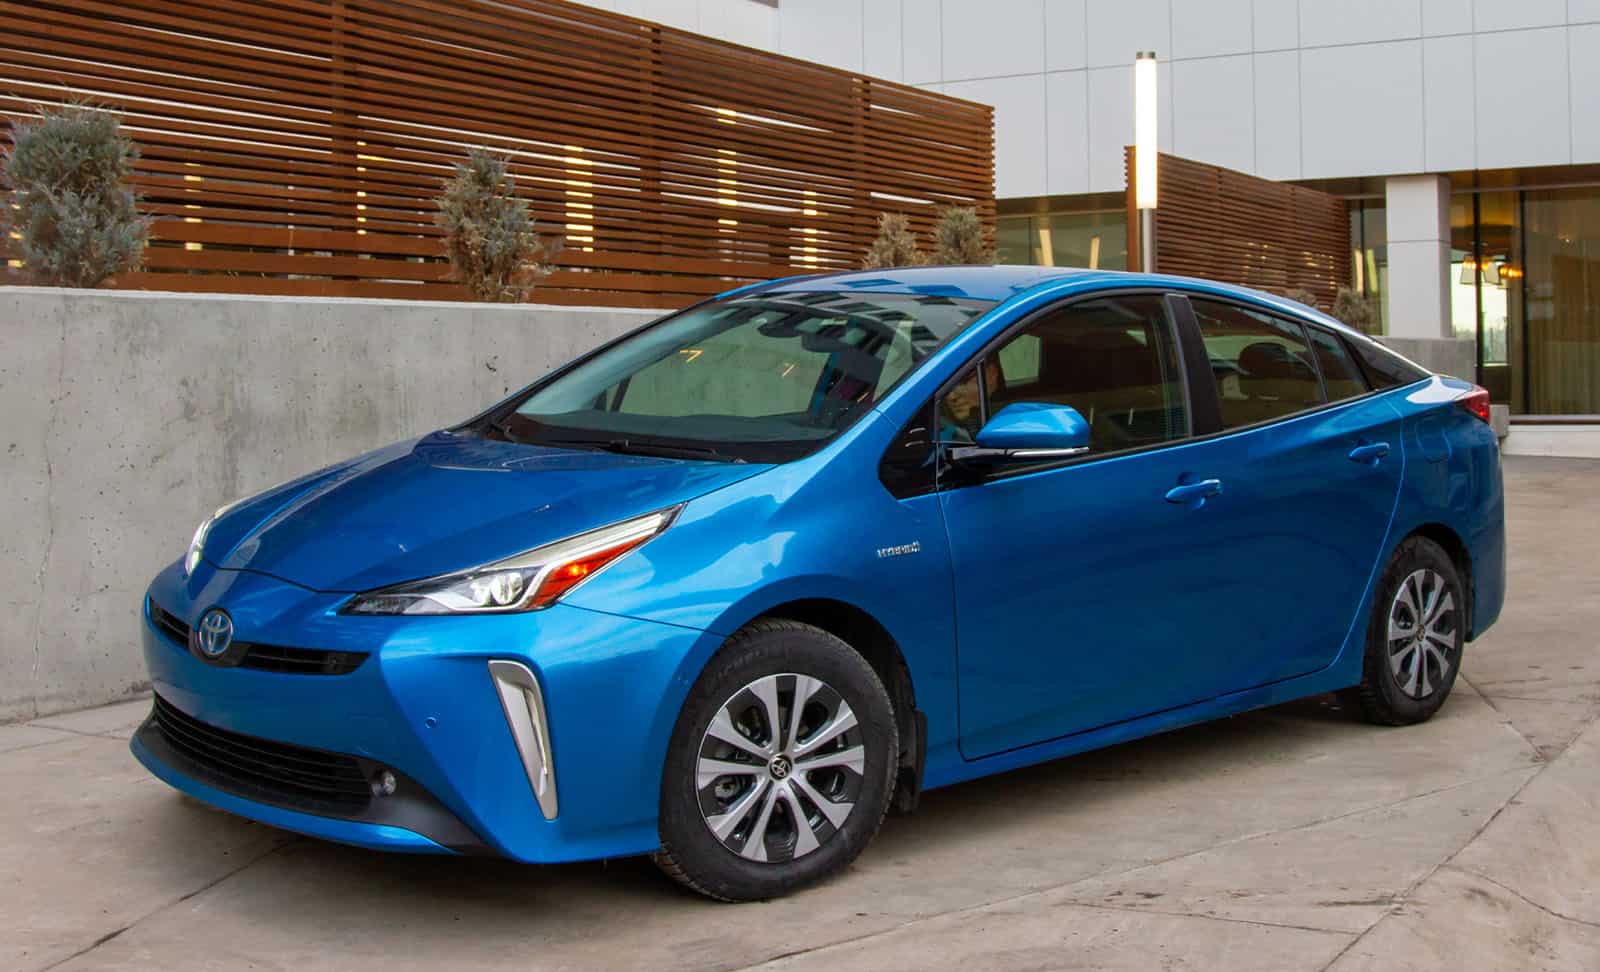 The 8 Best Hybrid Cars in Canada 2022: Top Rated Models